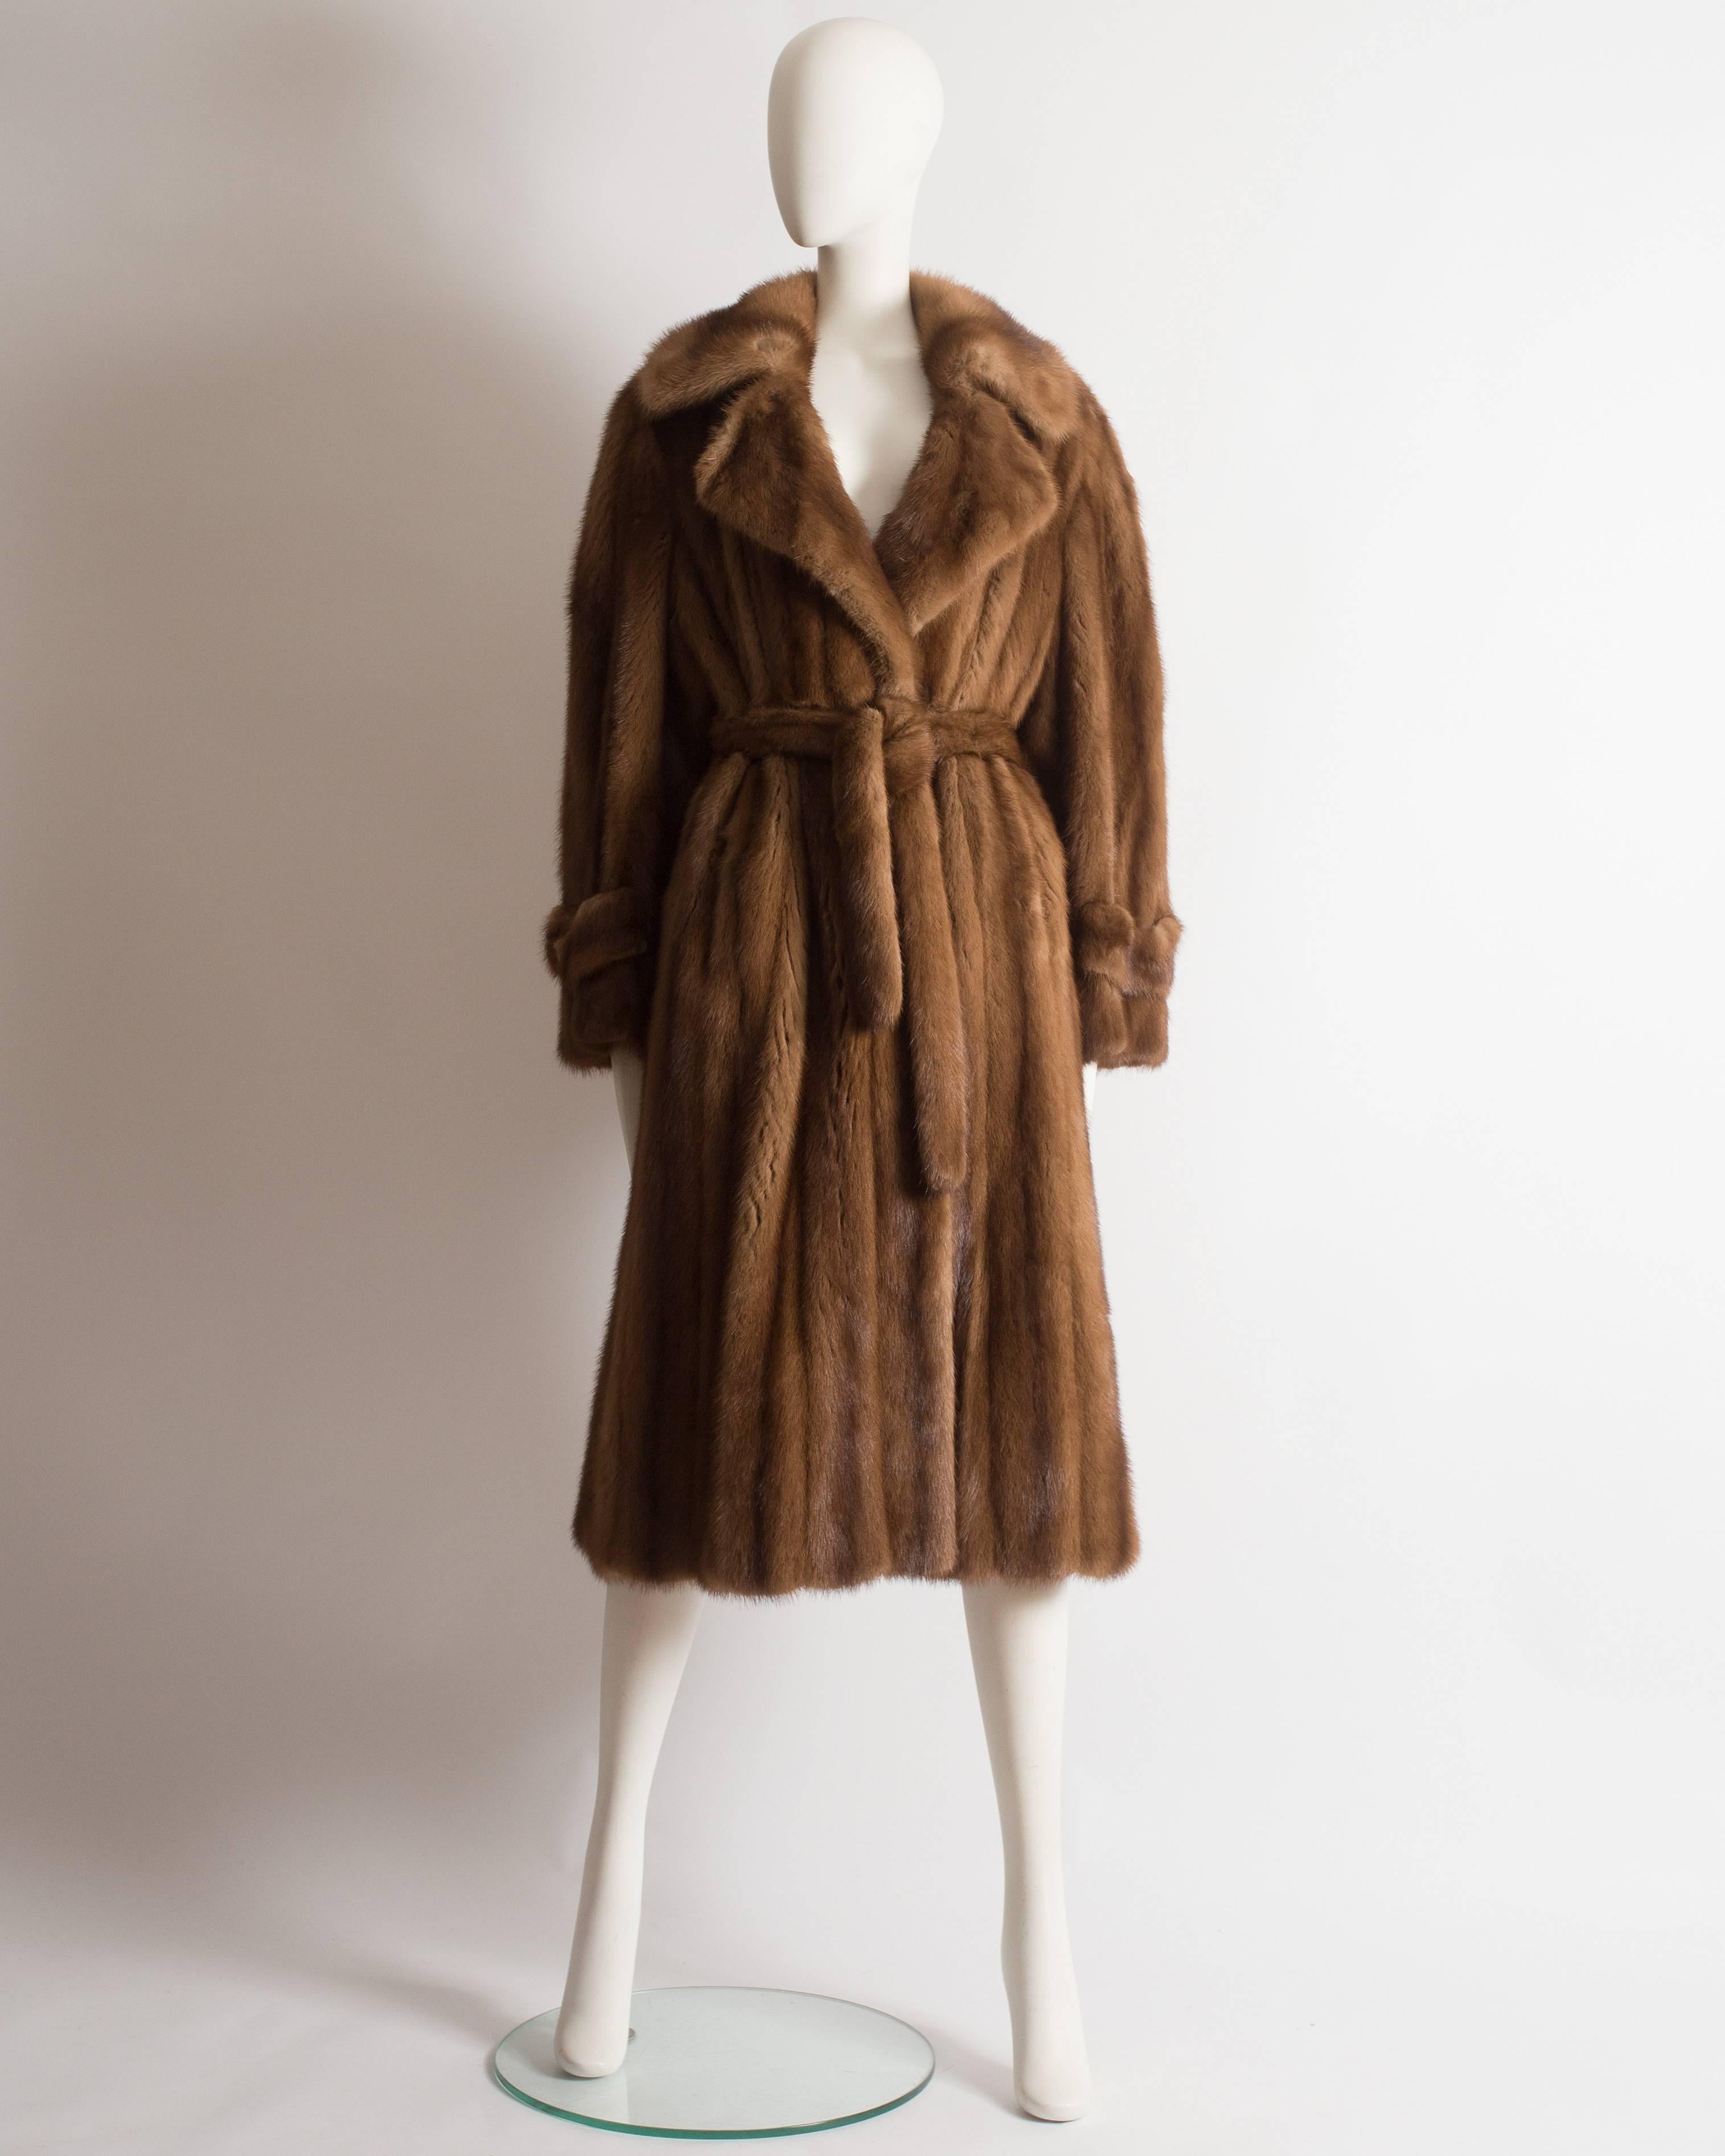 Luxurious Christian Dior Haute Couture wild mink coat, circa 1960s. The coat features wooden button closures on the cuffs and collar, matching mink waist belt, two hidden front pockets and large lapels and collar. 

